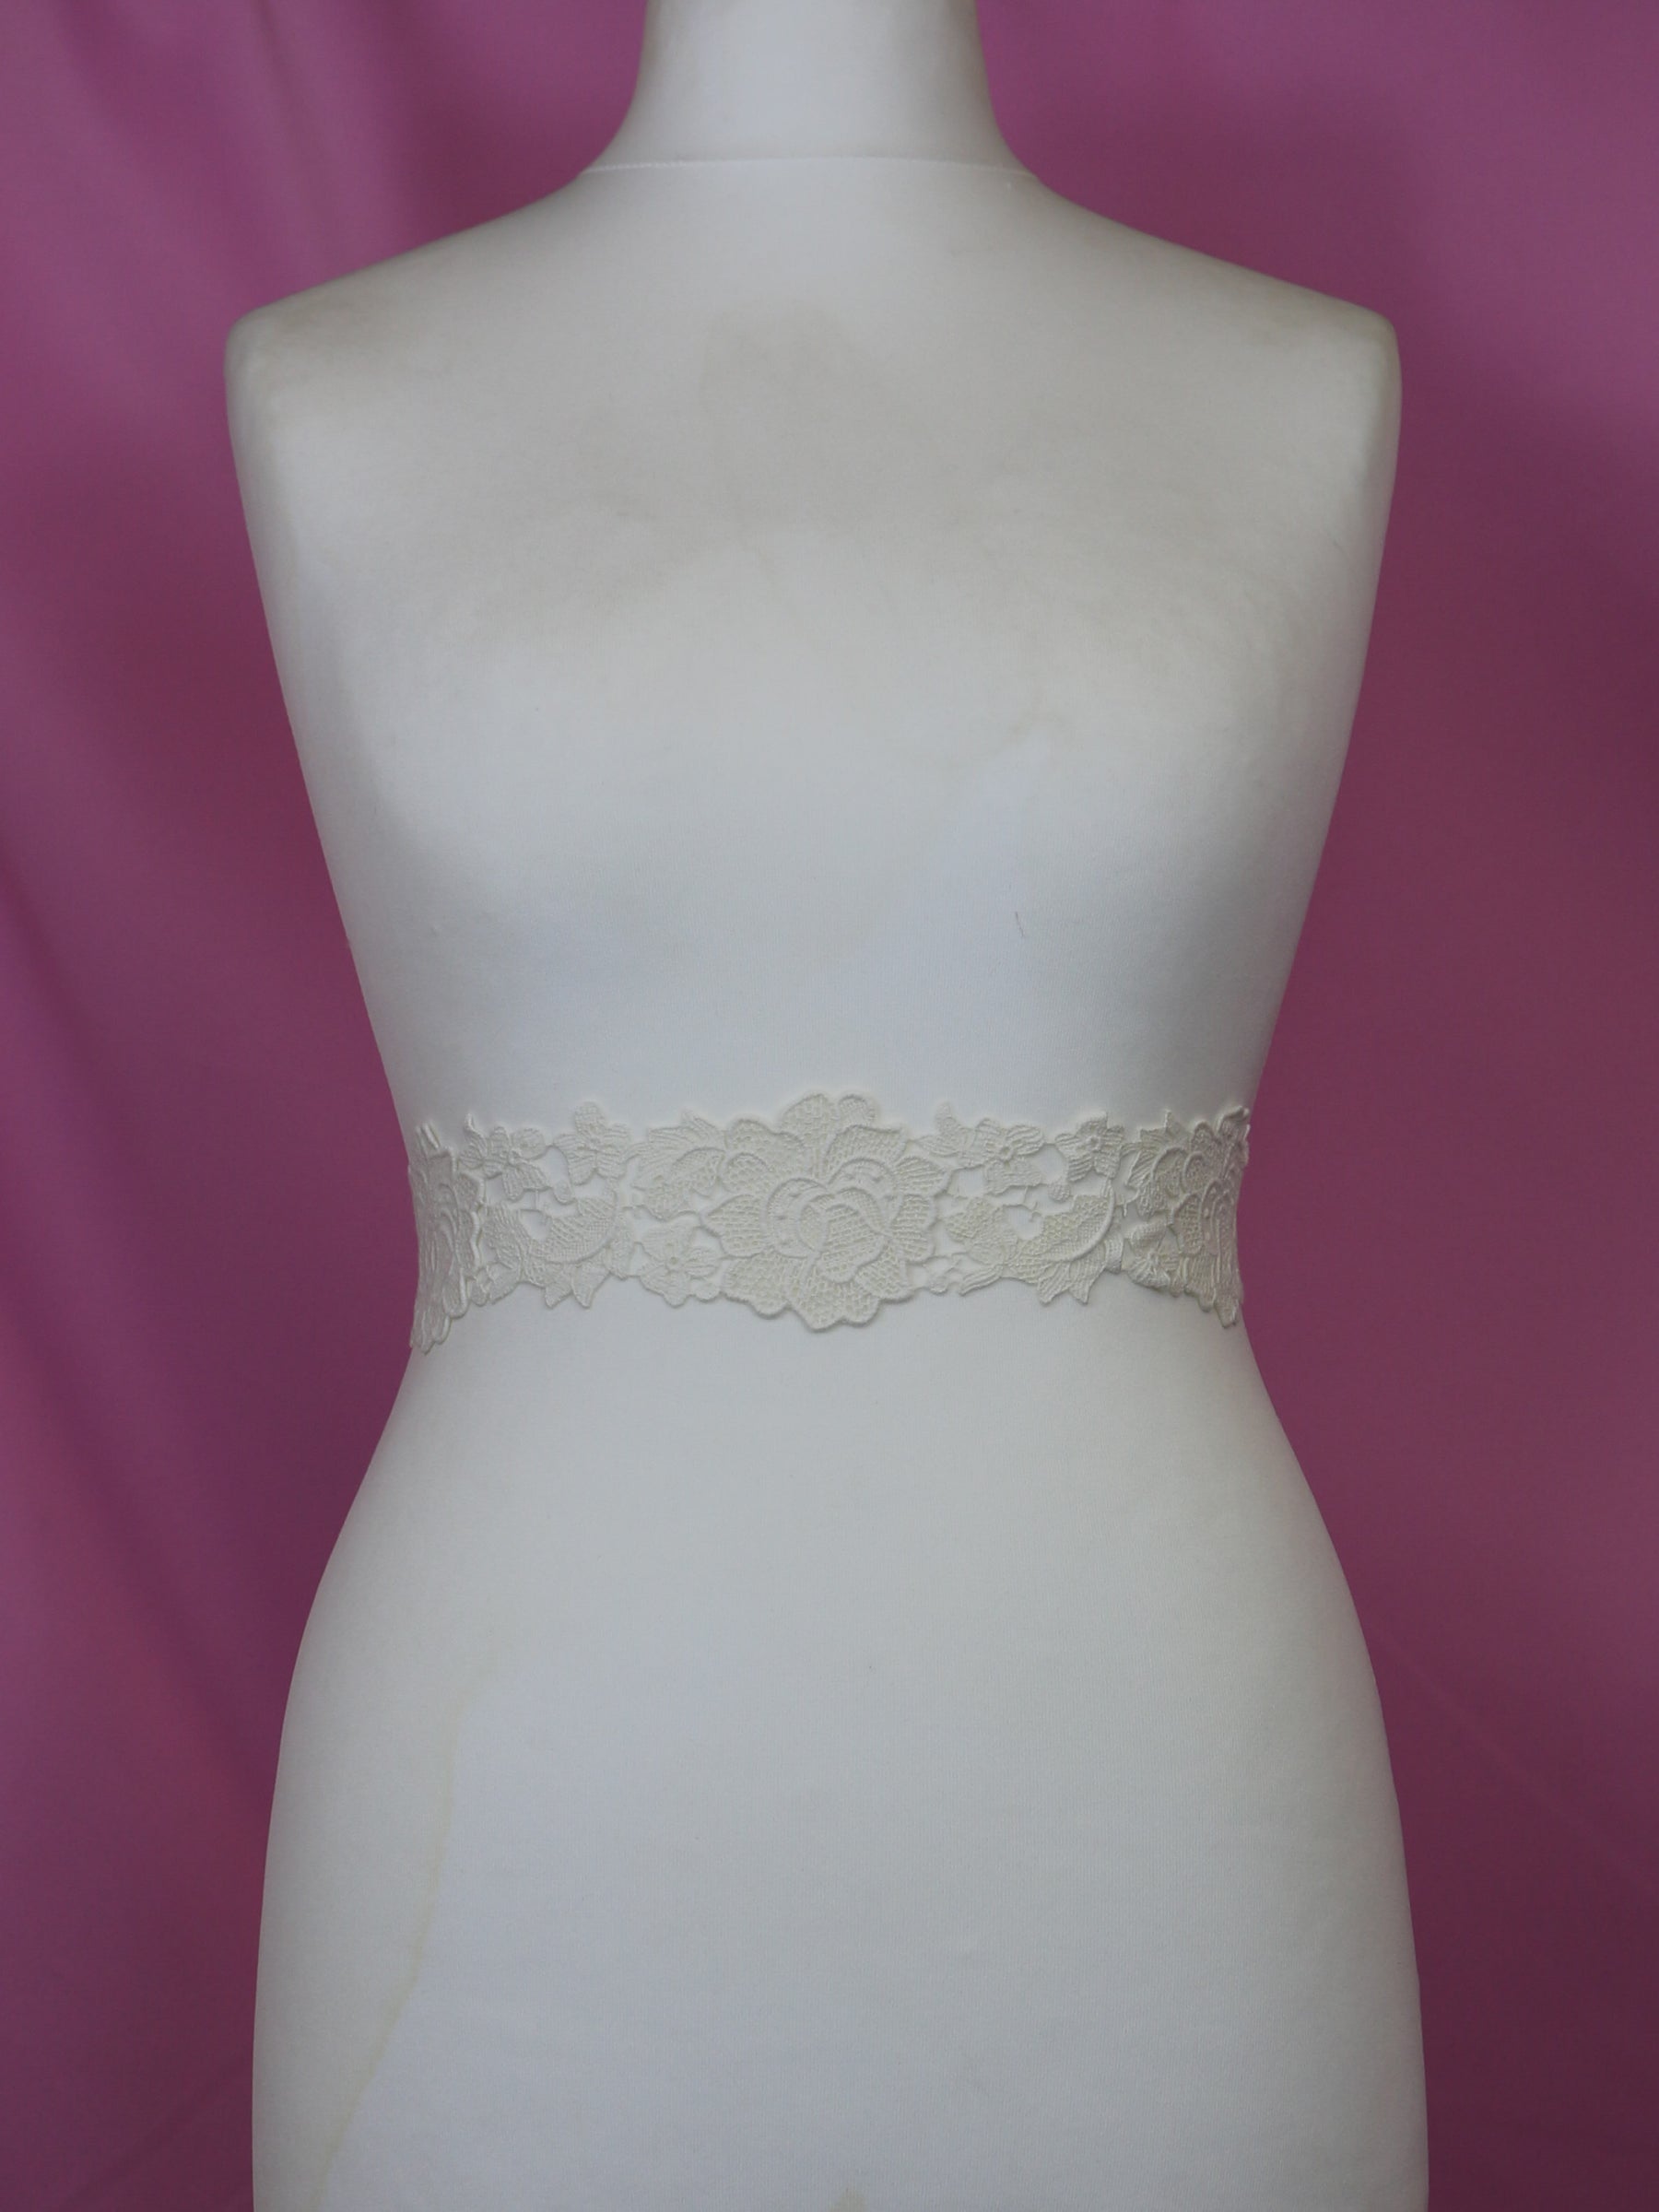 Ivory Guipure Lace Trim - Gypsy